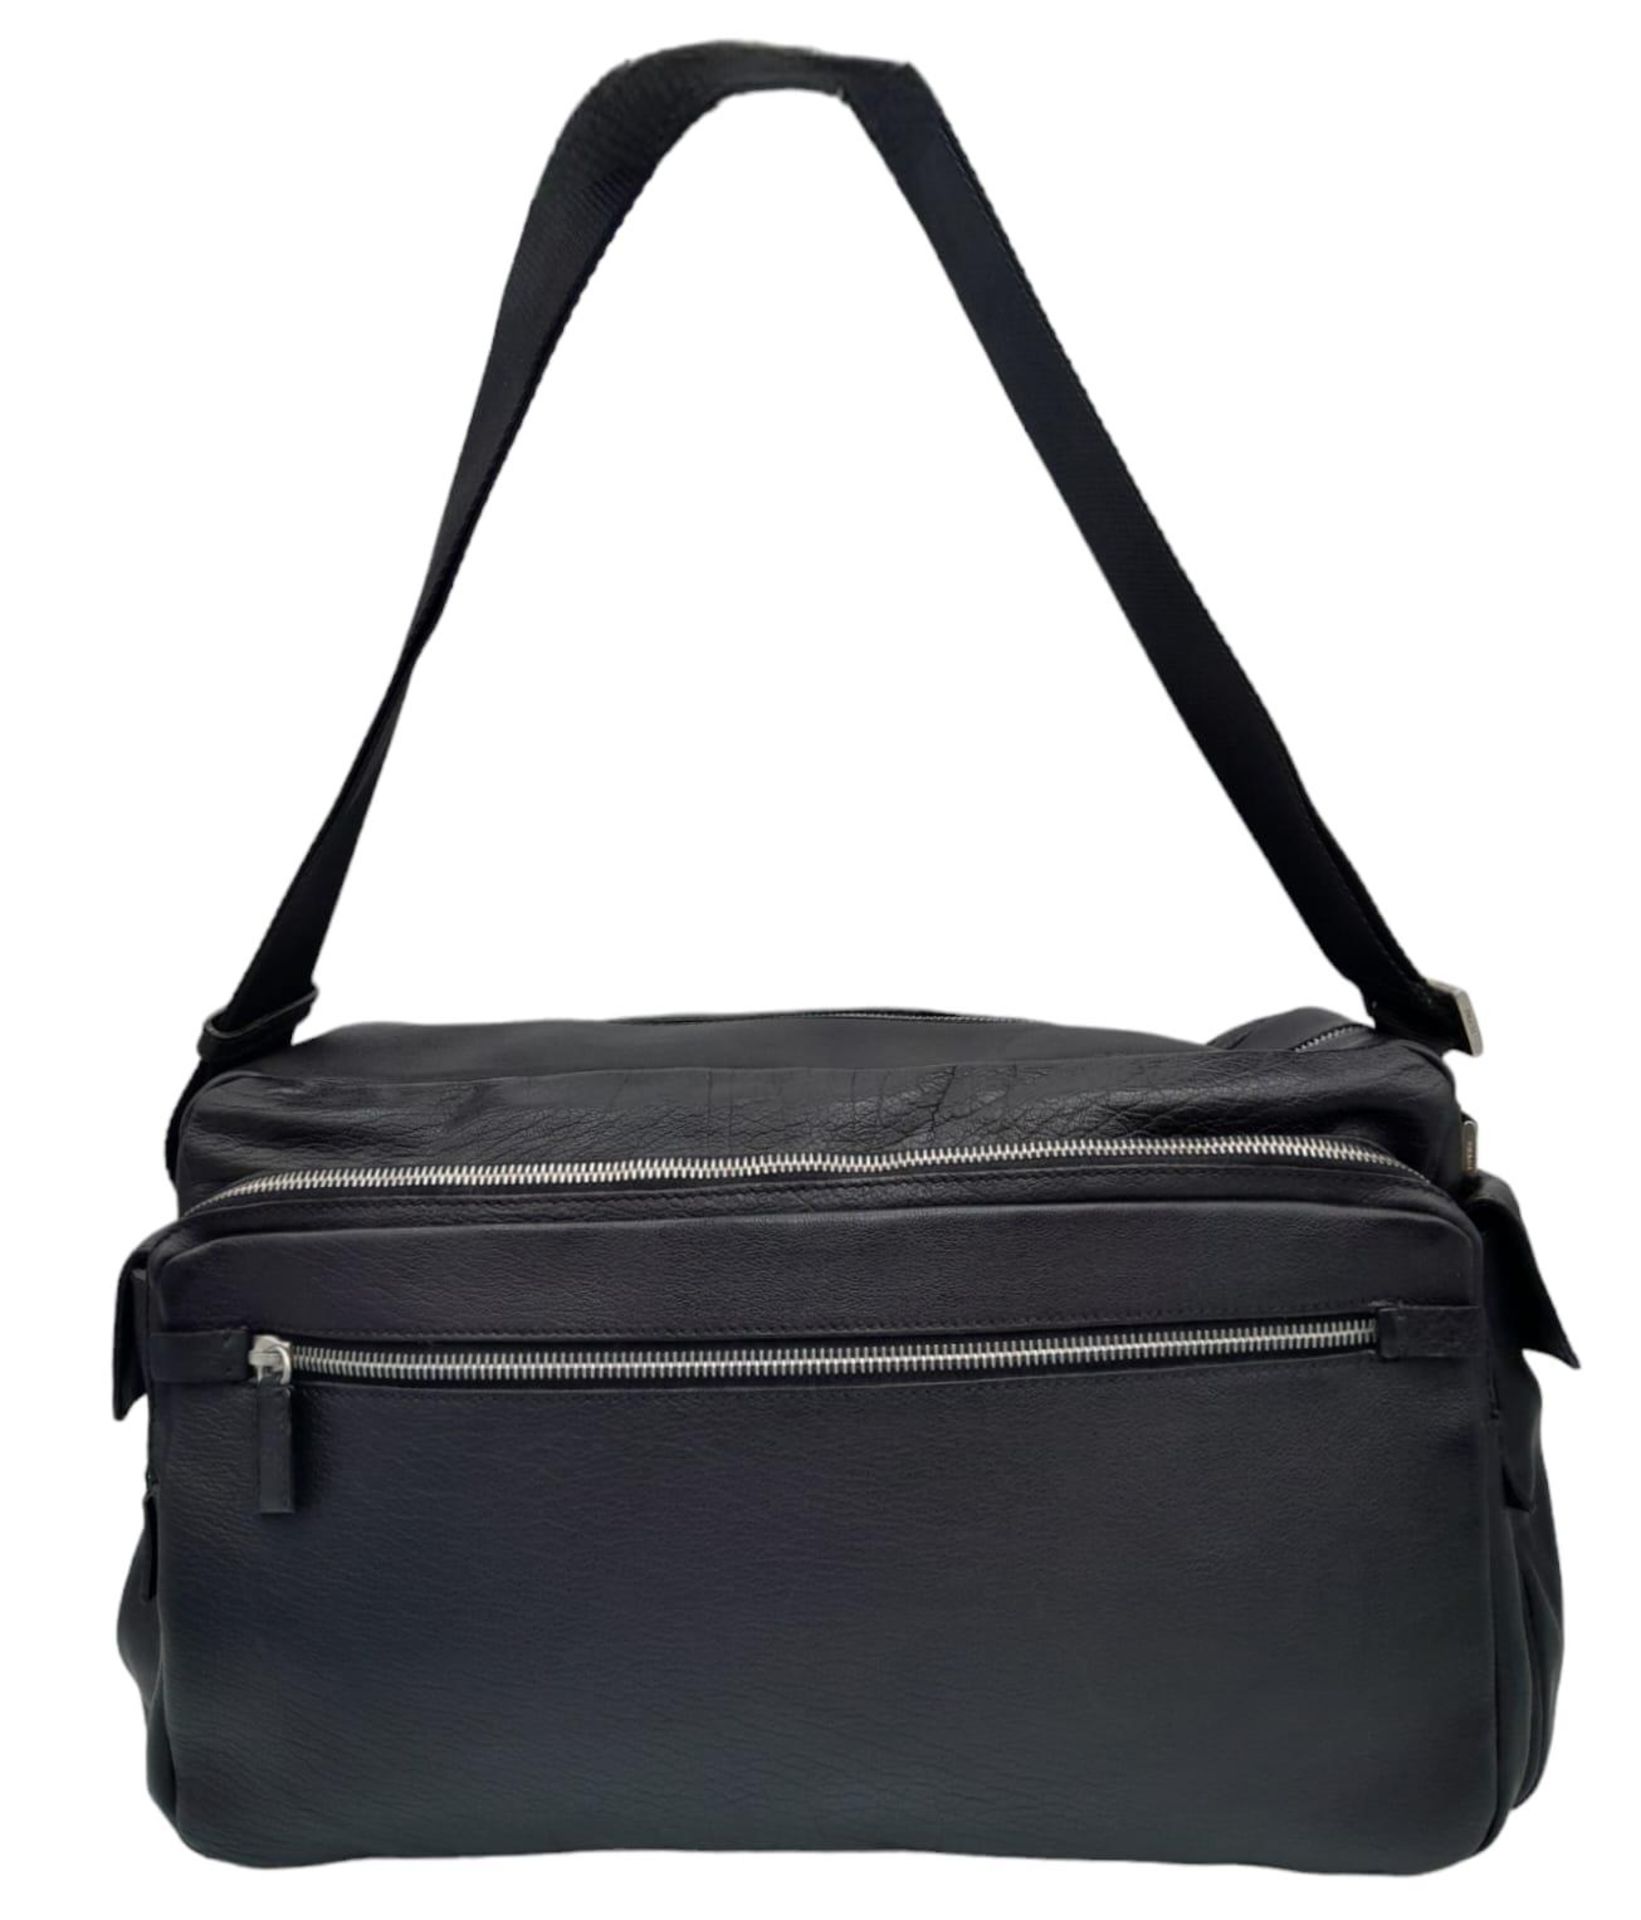 A Prada Black Duffle Bag. Leather exterior with silver-toned hardware, zipped outer compartment to